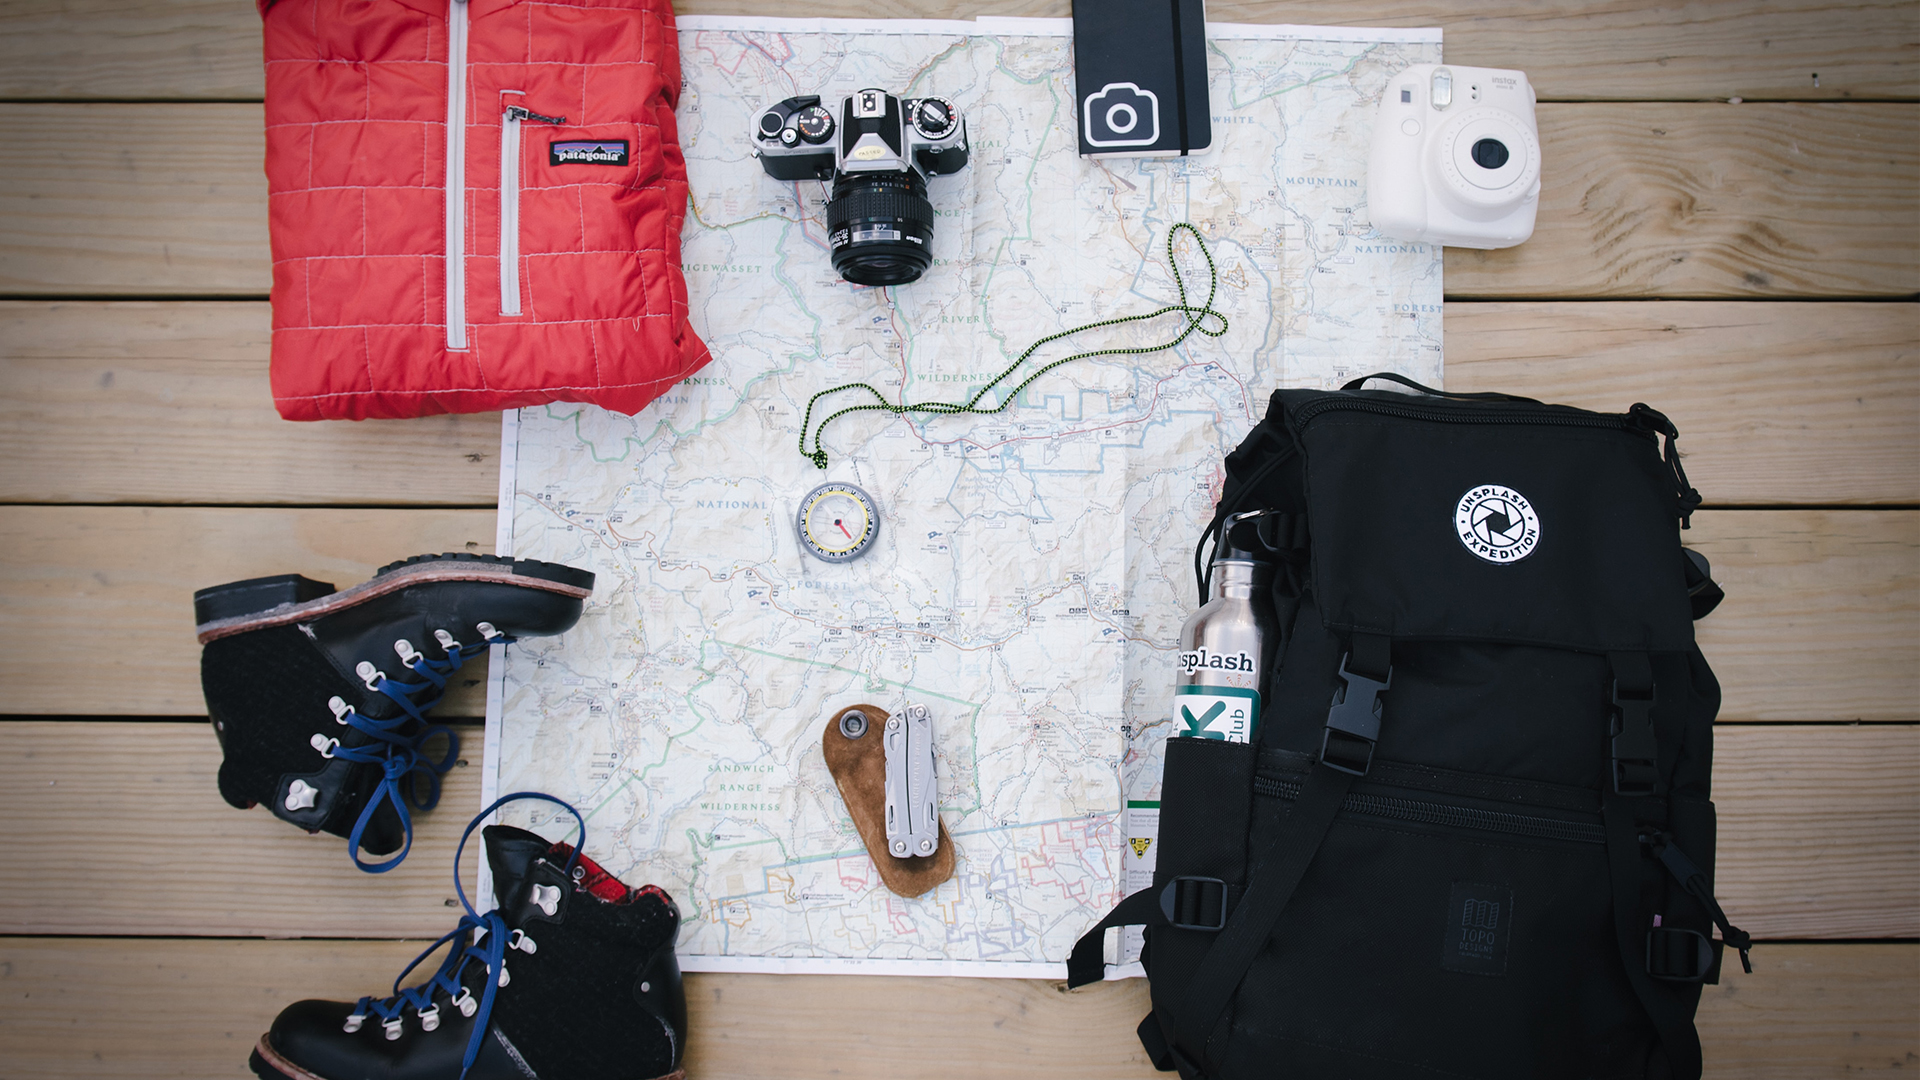 A red jacket, boots, two cameras, a notebook, compass, swiss army knife and backpack scattered on top of a map on the floor.